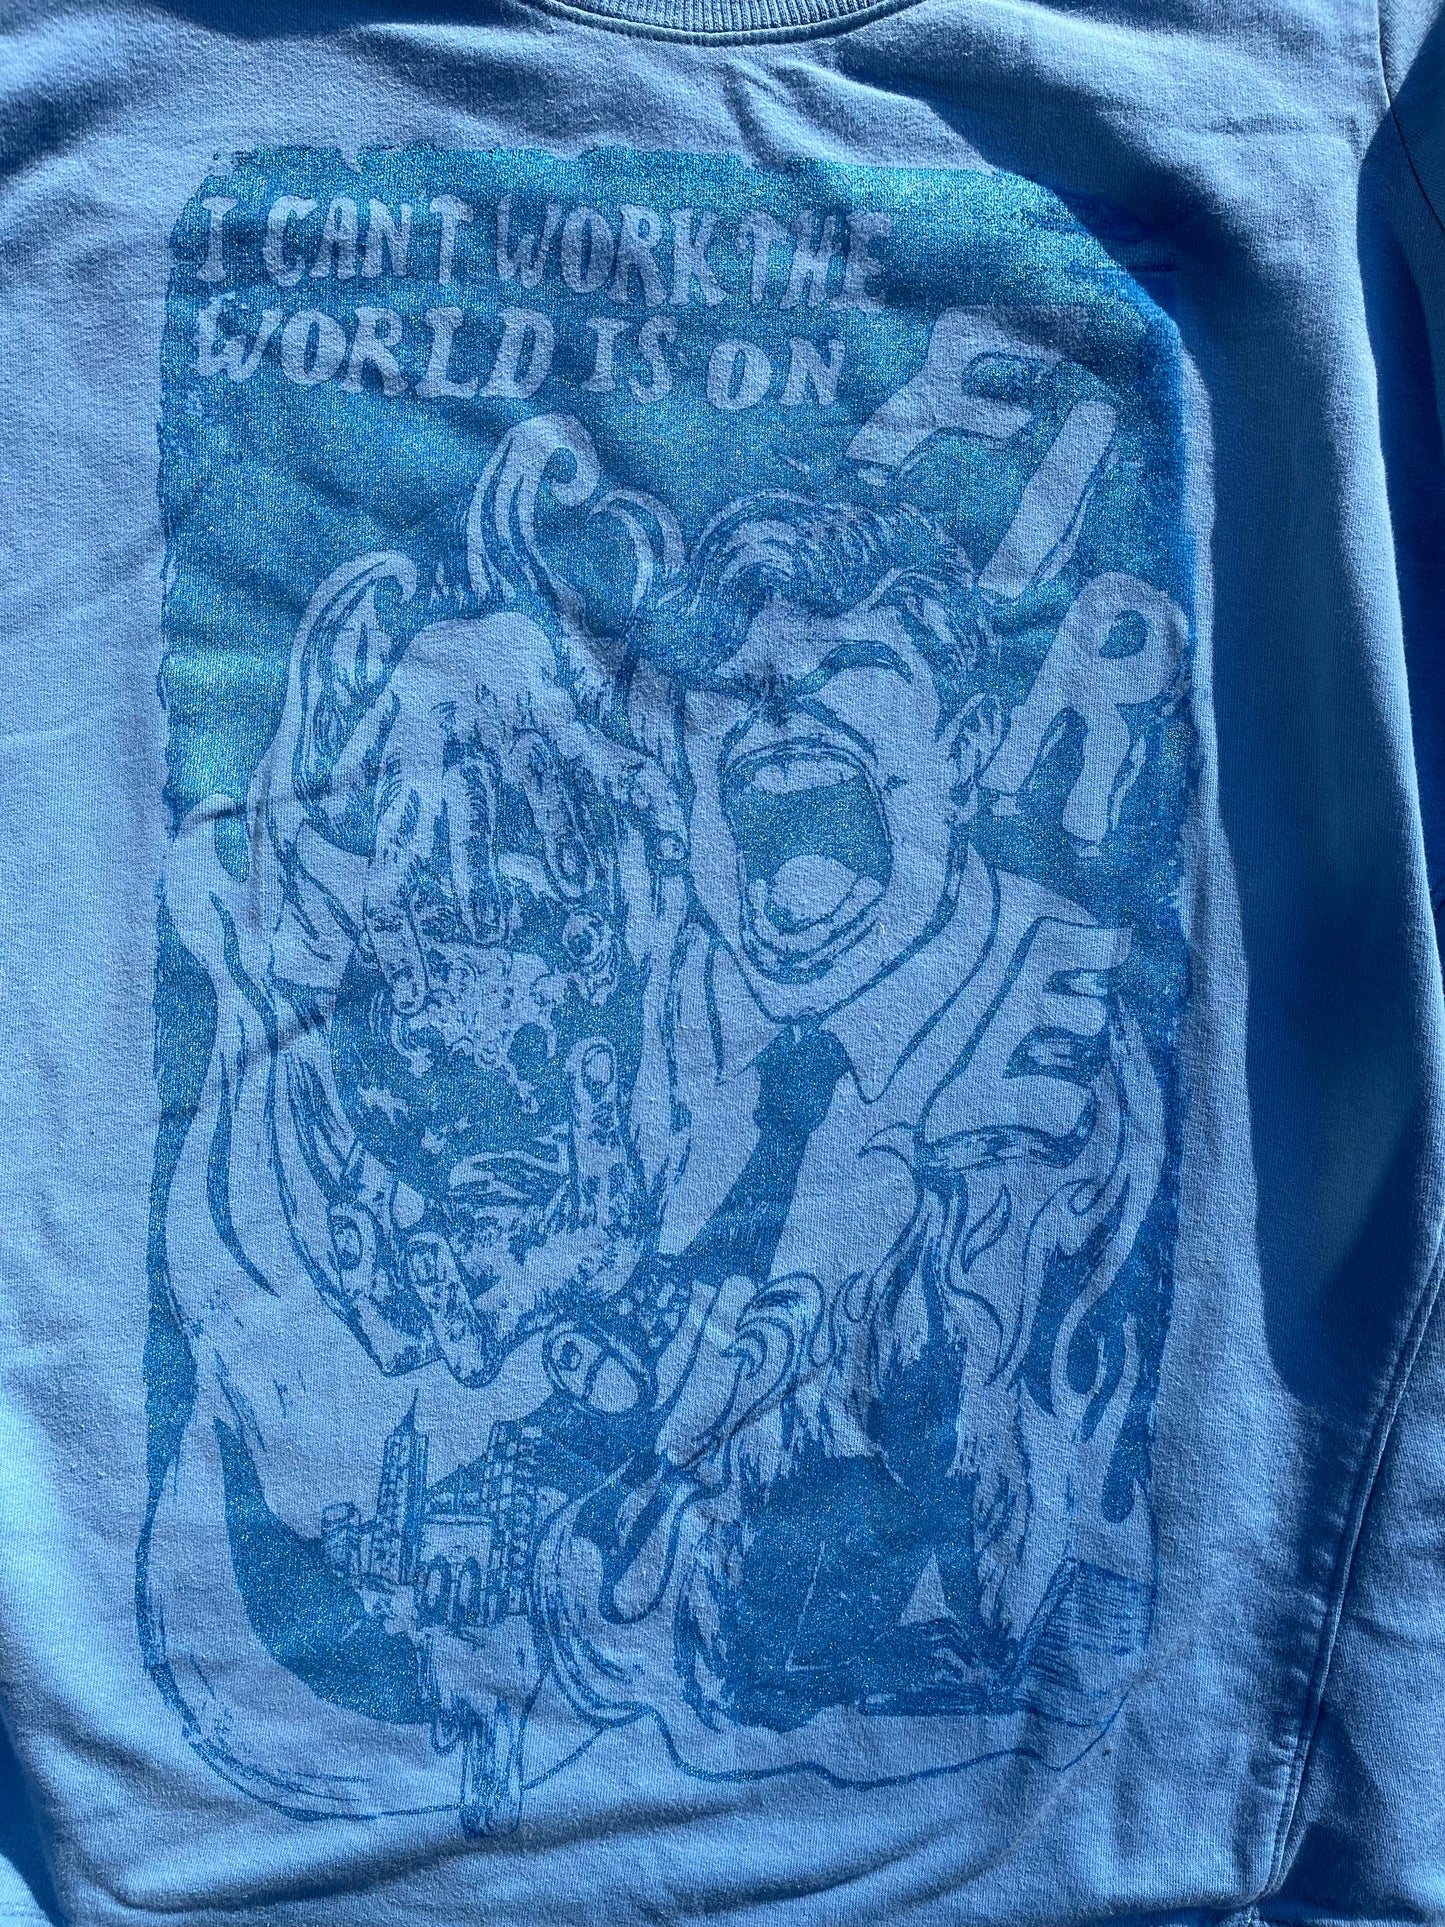 SMALL I Can't Work the World is on Fire blue graphic tee shirt 02